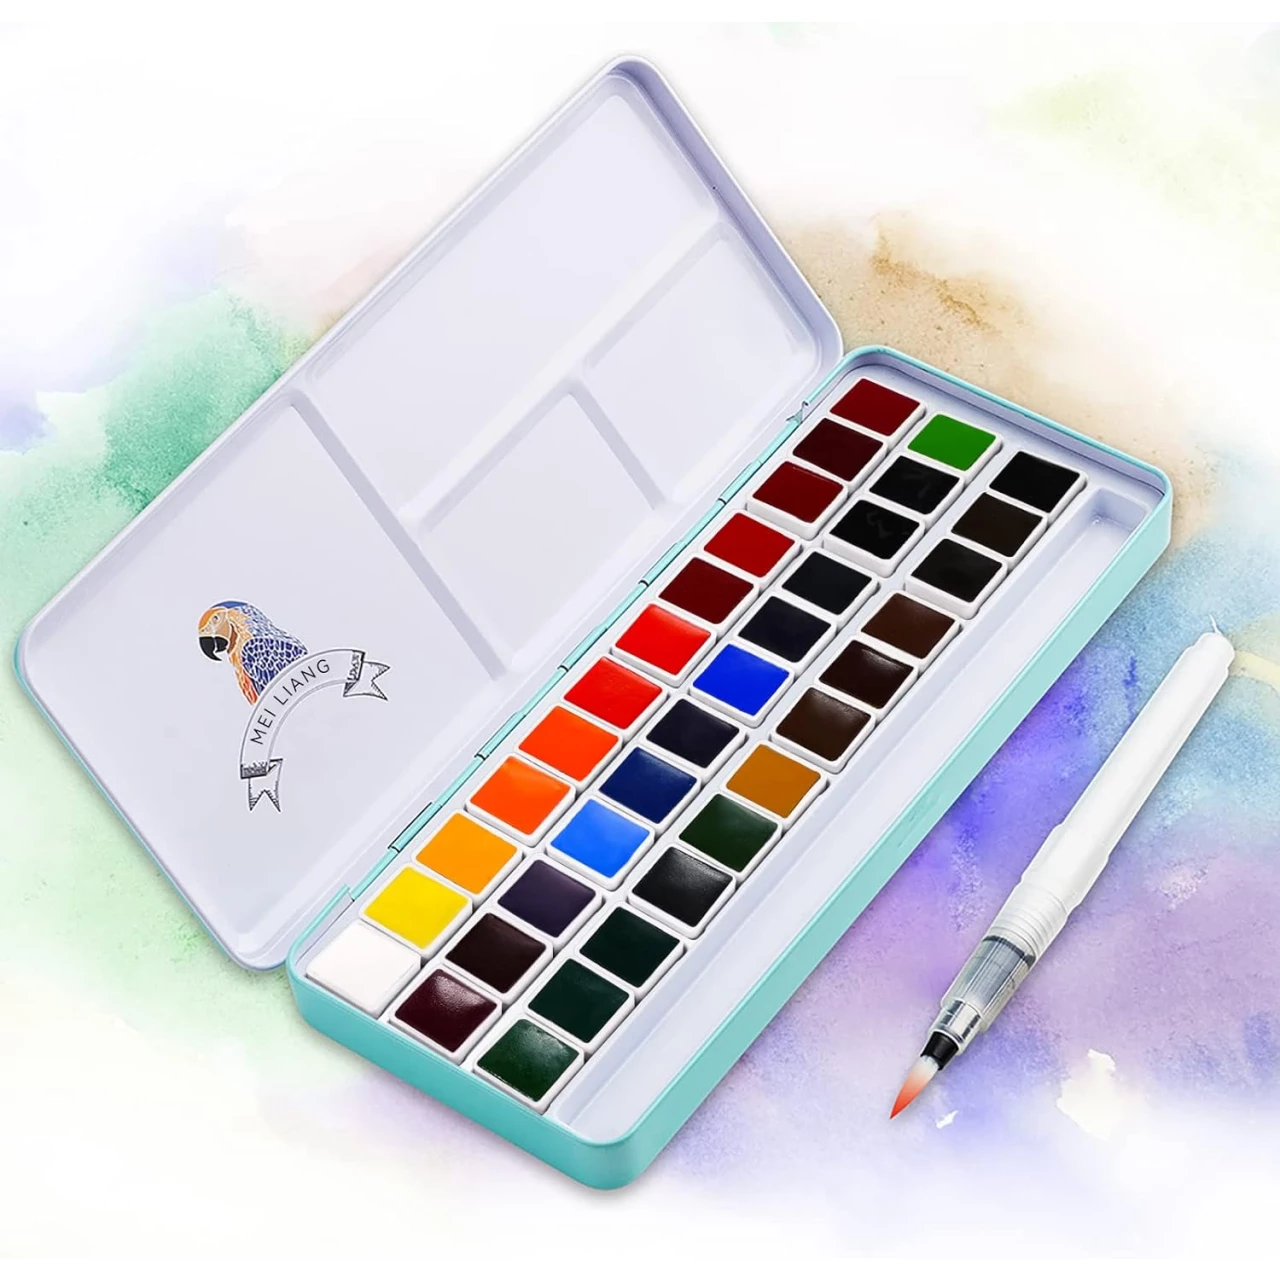 MeiLiang Watercolor Paint Set, 36 Vivid Colors in Pocket Box with Metal Ring and Watercolor Brush